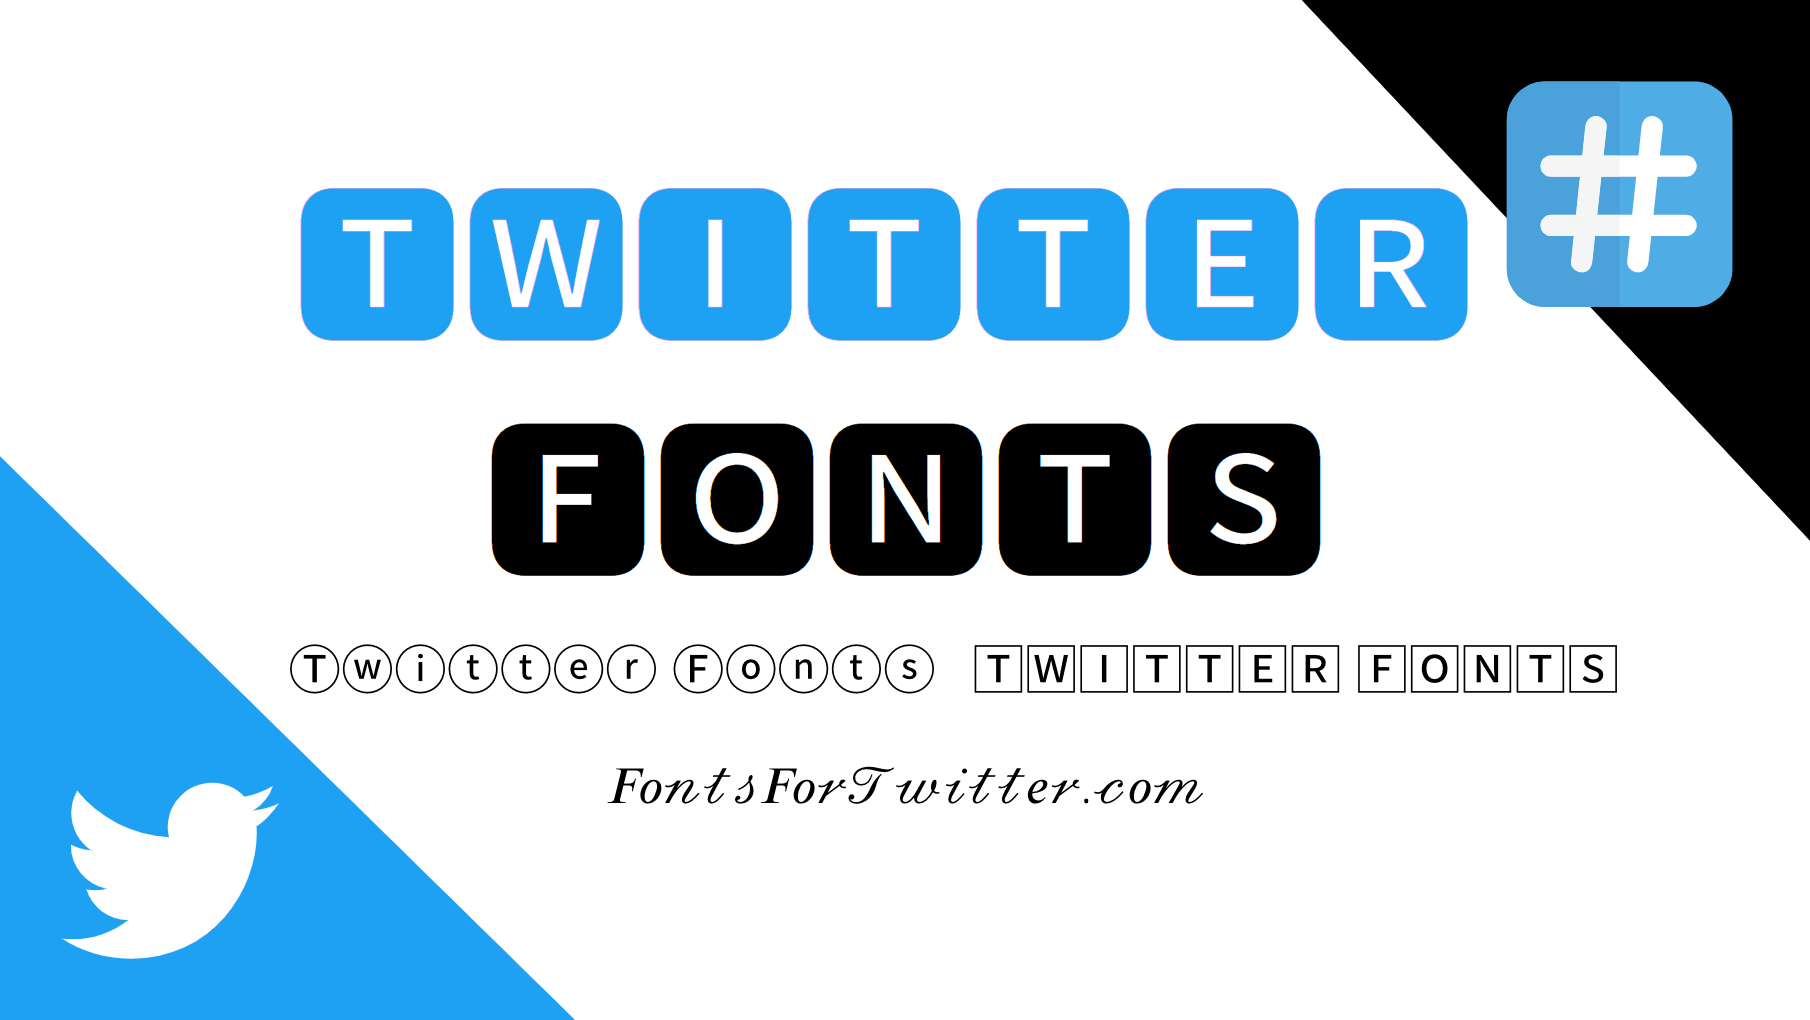 Pakistani Effectively House 𝟙 Fonts For Twitter ⚡😍 ᐈ 𝕋𝕨𝕚𝕥𝕥𝕖𝕣 𝖋𝖔𝖓𝖙 💋 𝐆𝐞𝐧𝐞𝐫𝐚𝐭𝐨𝐫